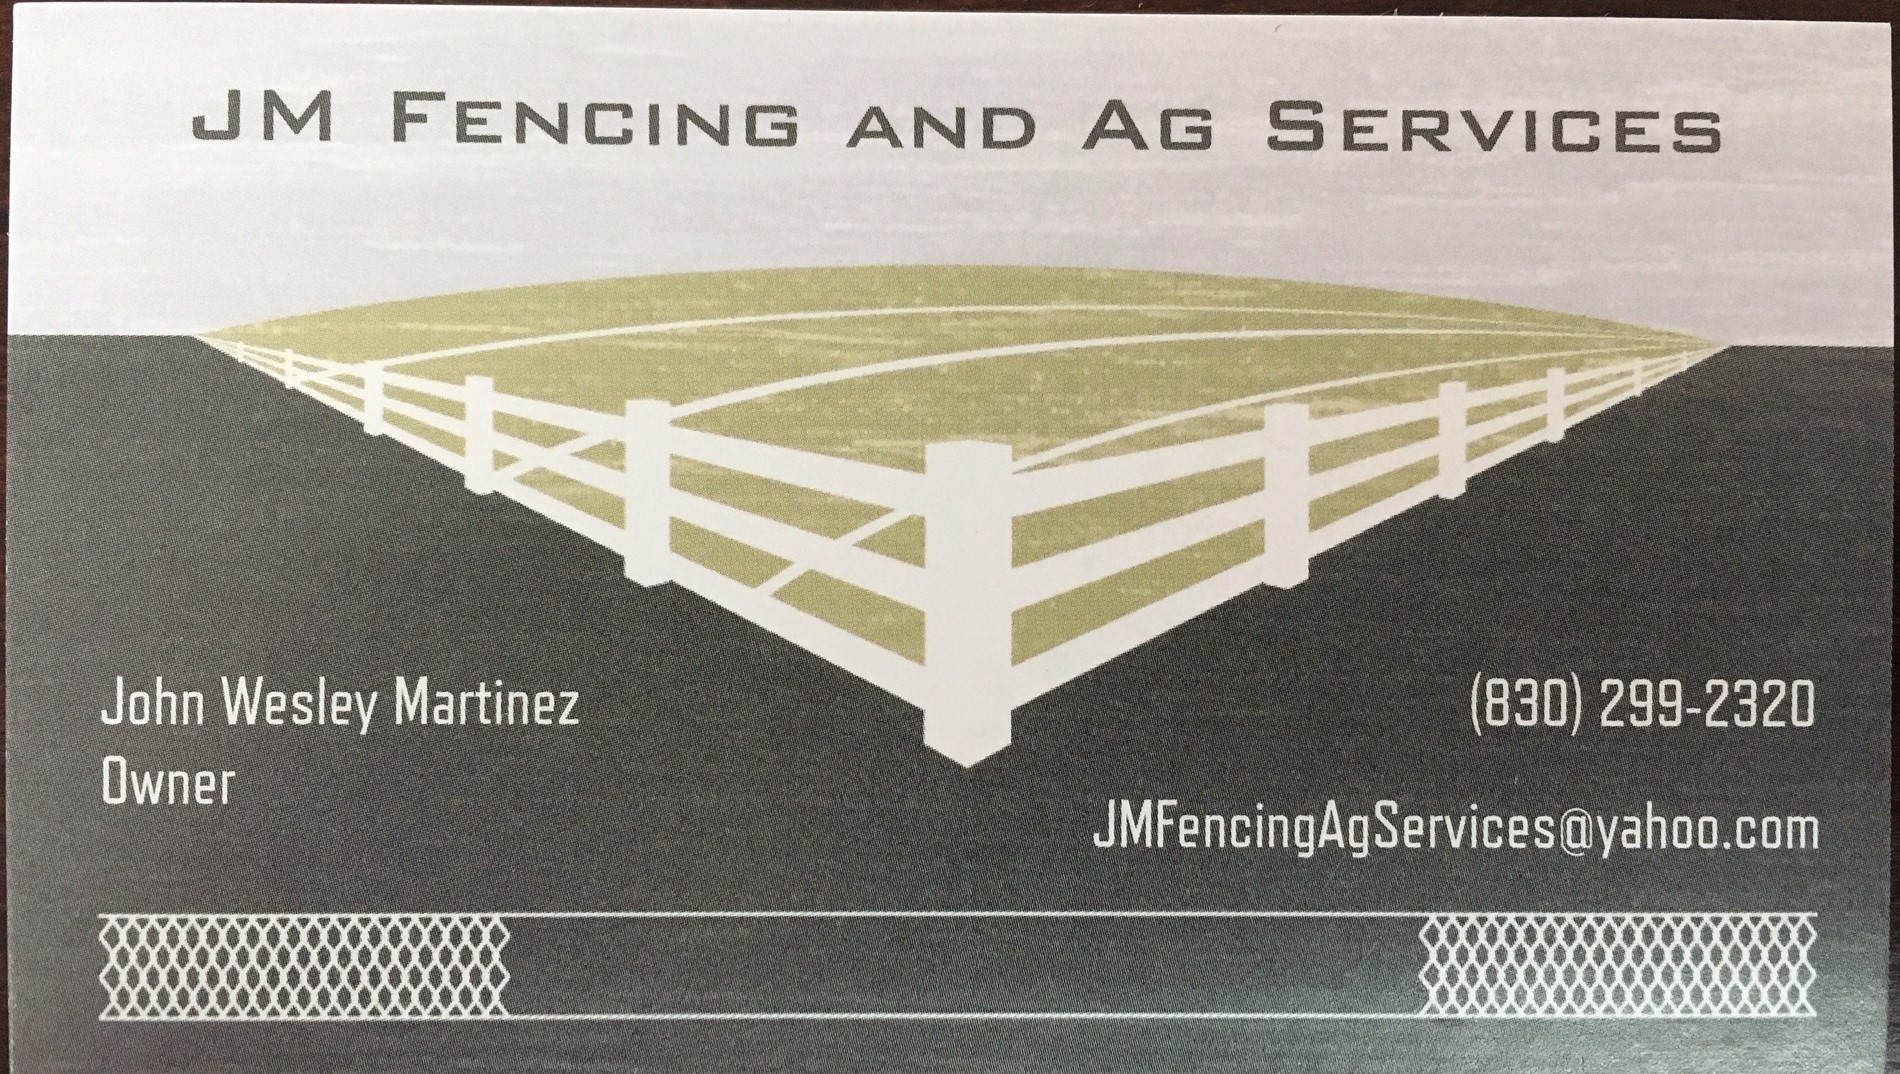 JM Fencing and Ag Services
JMFencingAgServices@yahoo.com
830 299-2320